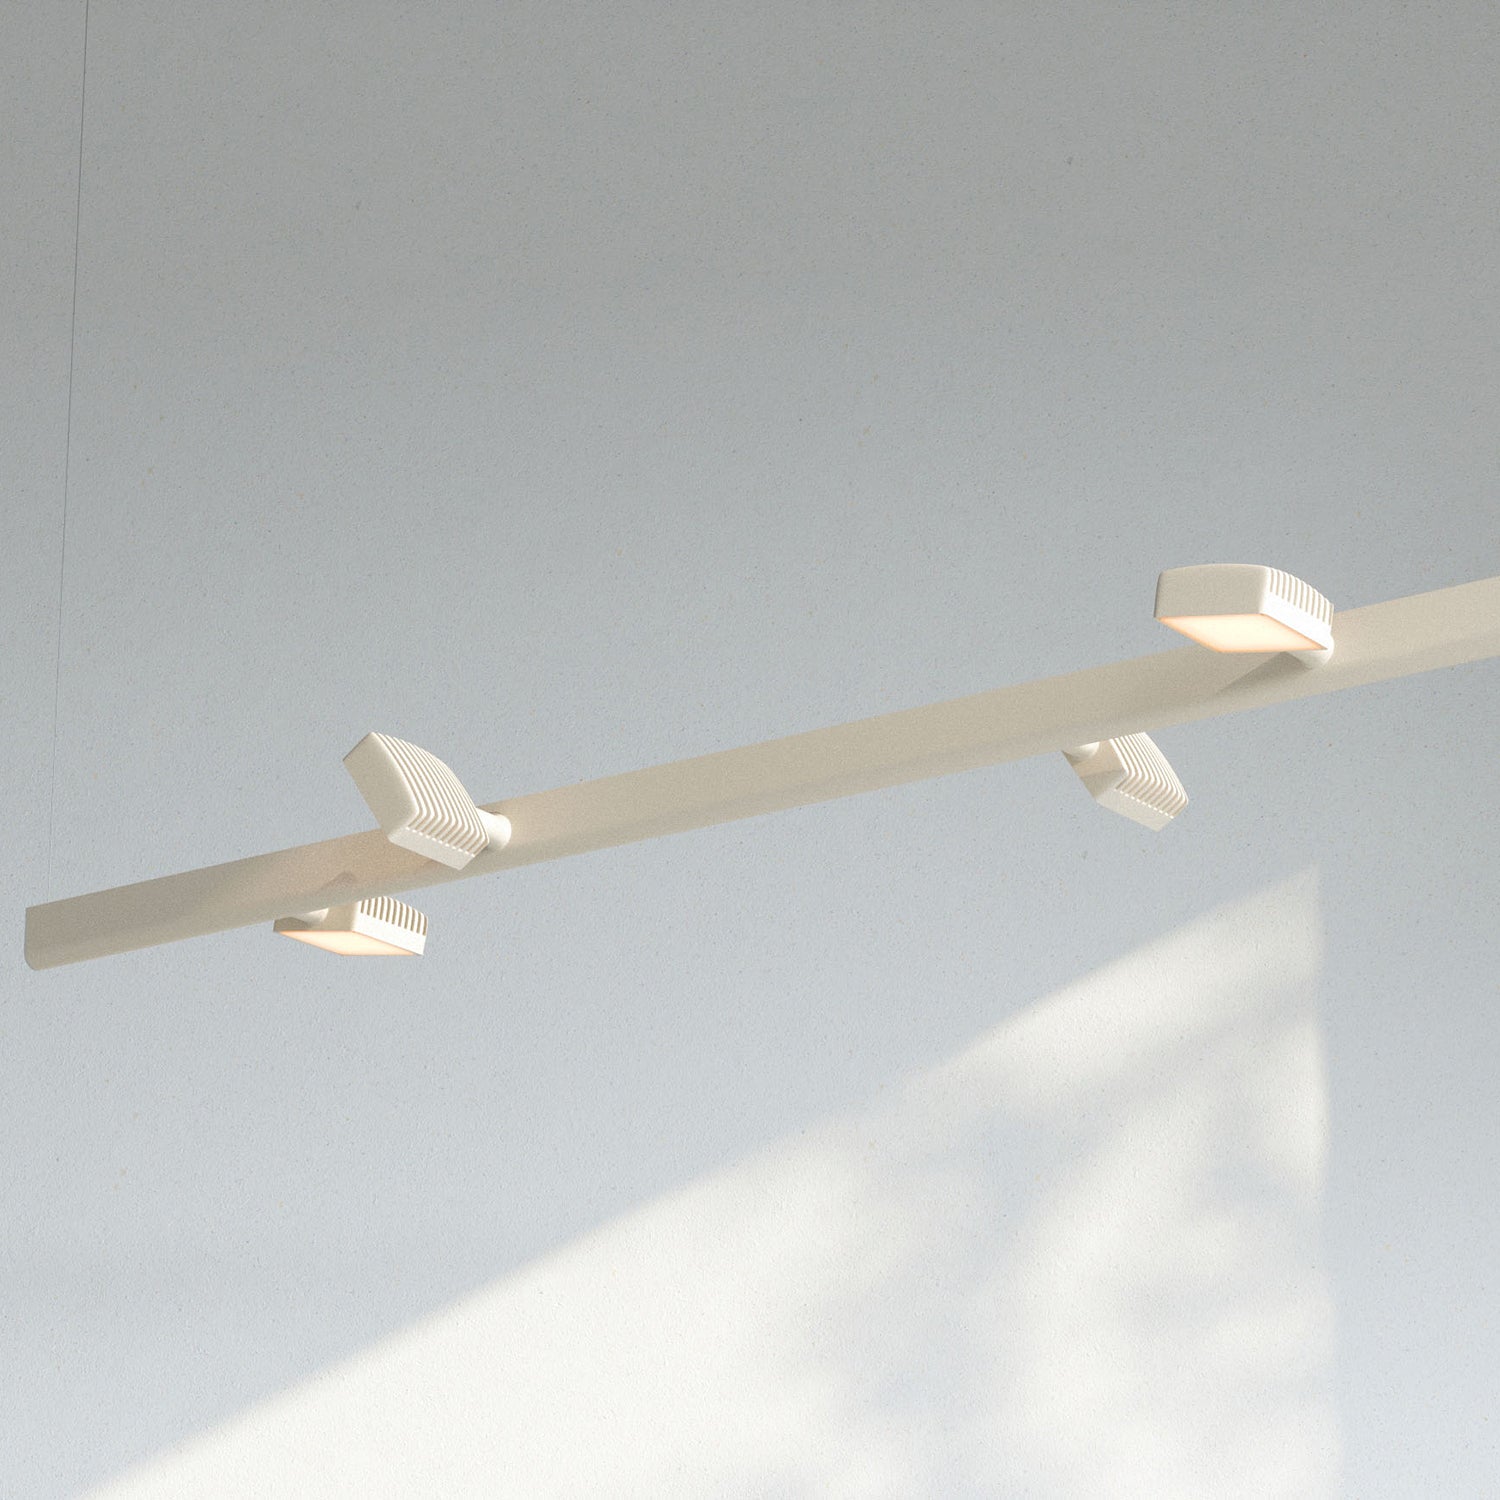 Dorval 05 Suspension Lamp with Uplight: 4 Heads